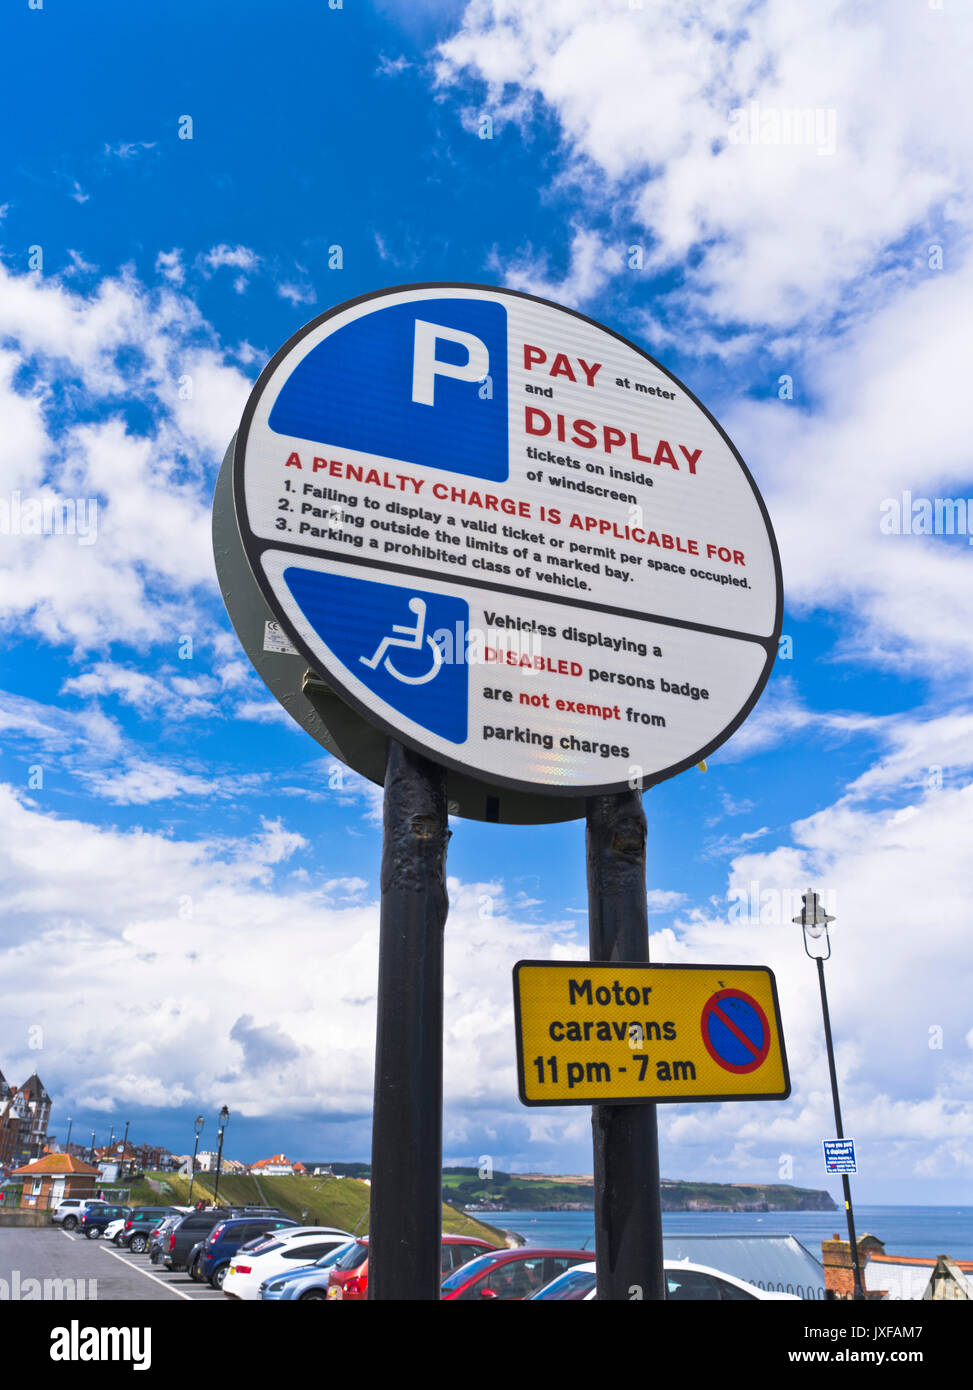 dh Pay and Display PARKING UK Pay display sign disabled badge drives not exempt parking carparking Stock Photo